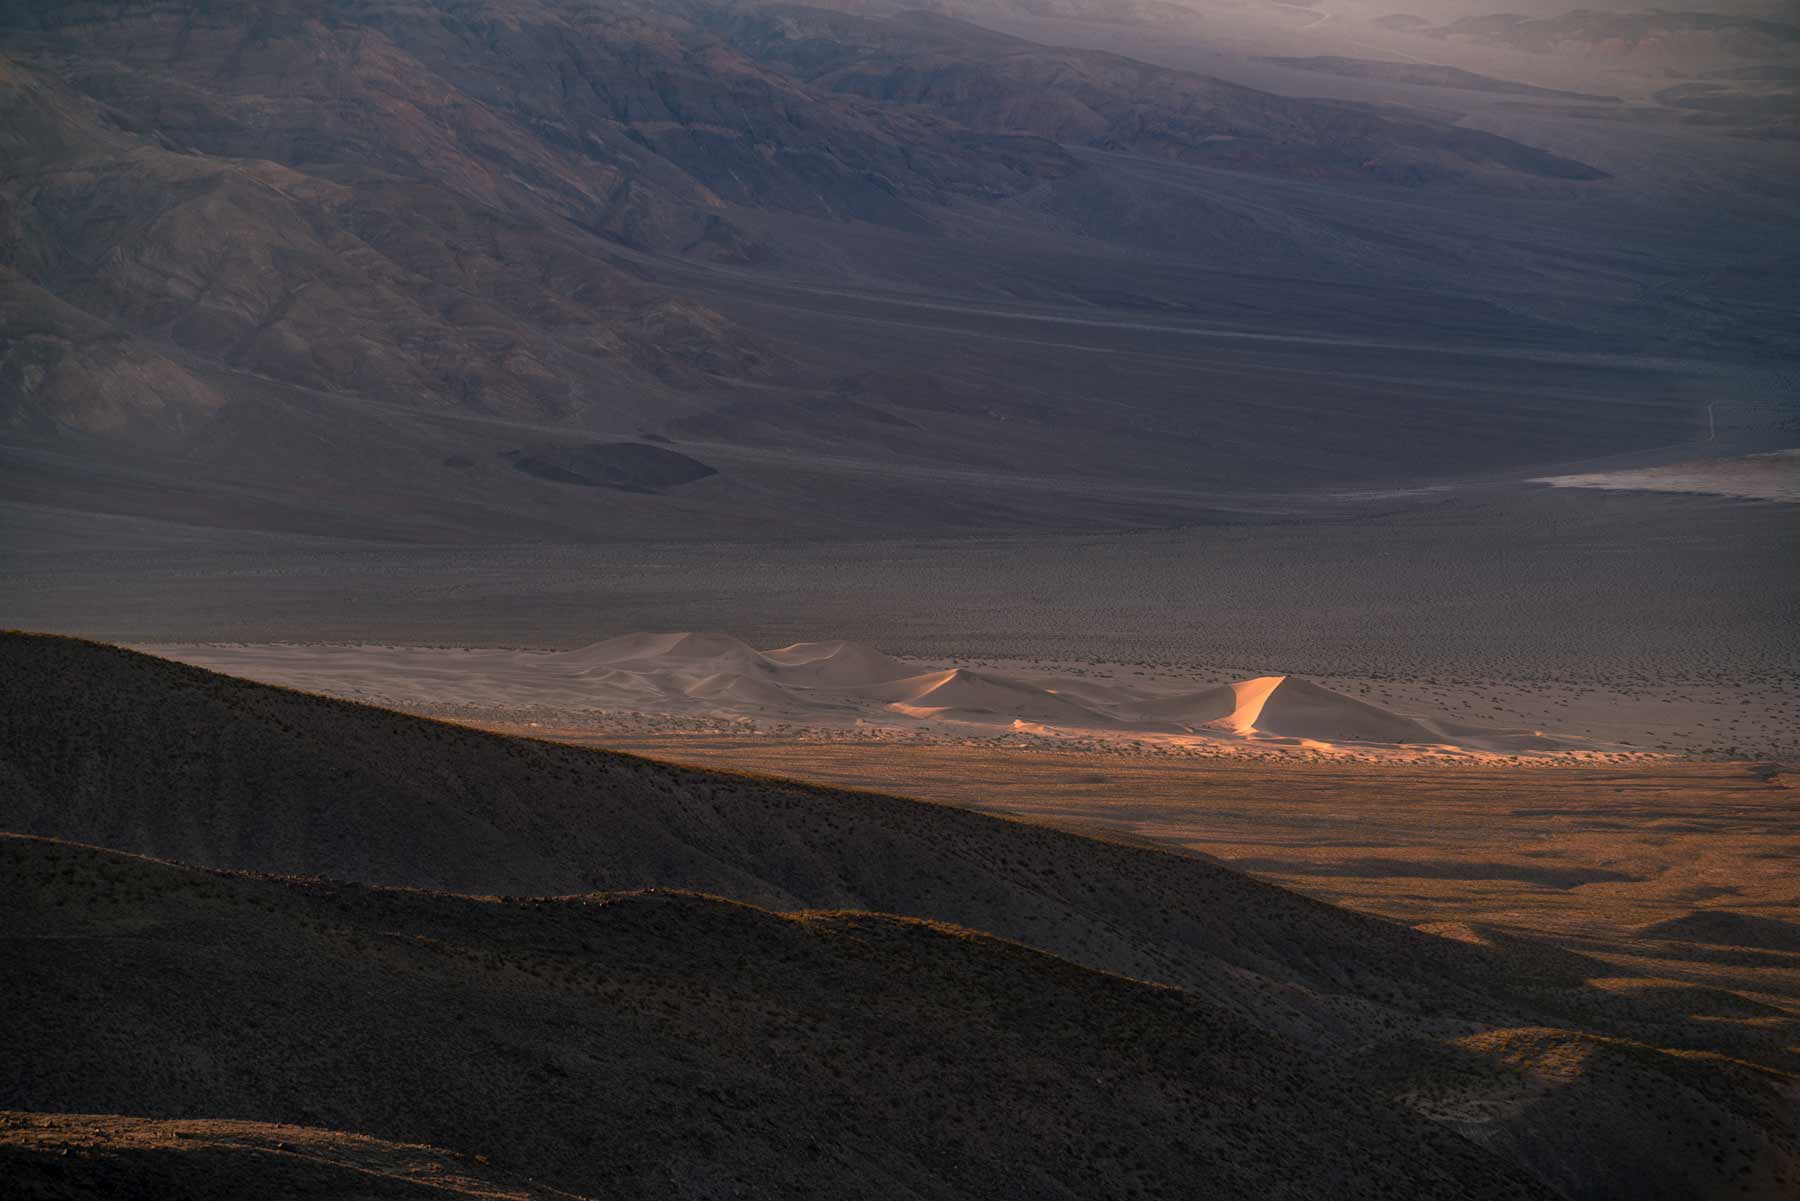 panamint dunes, things to do death valley